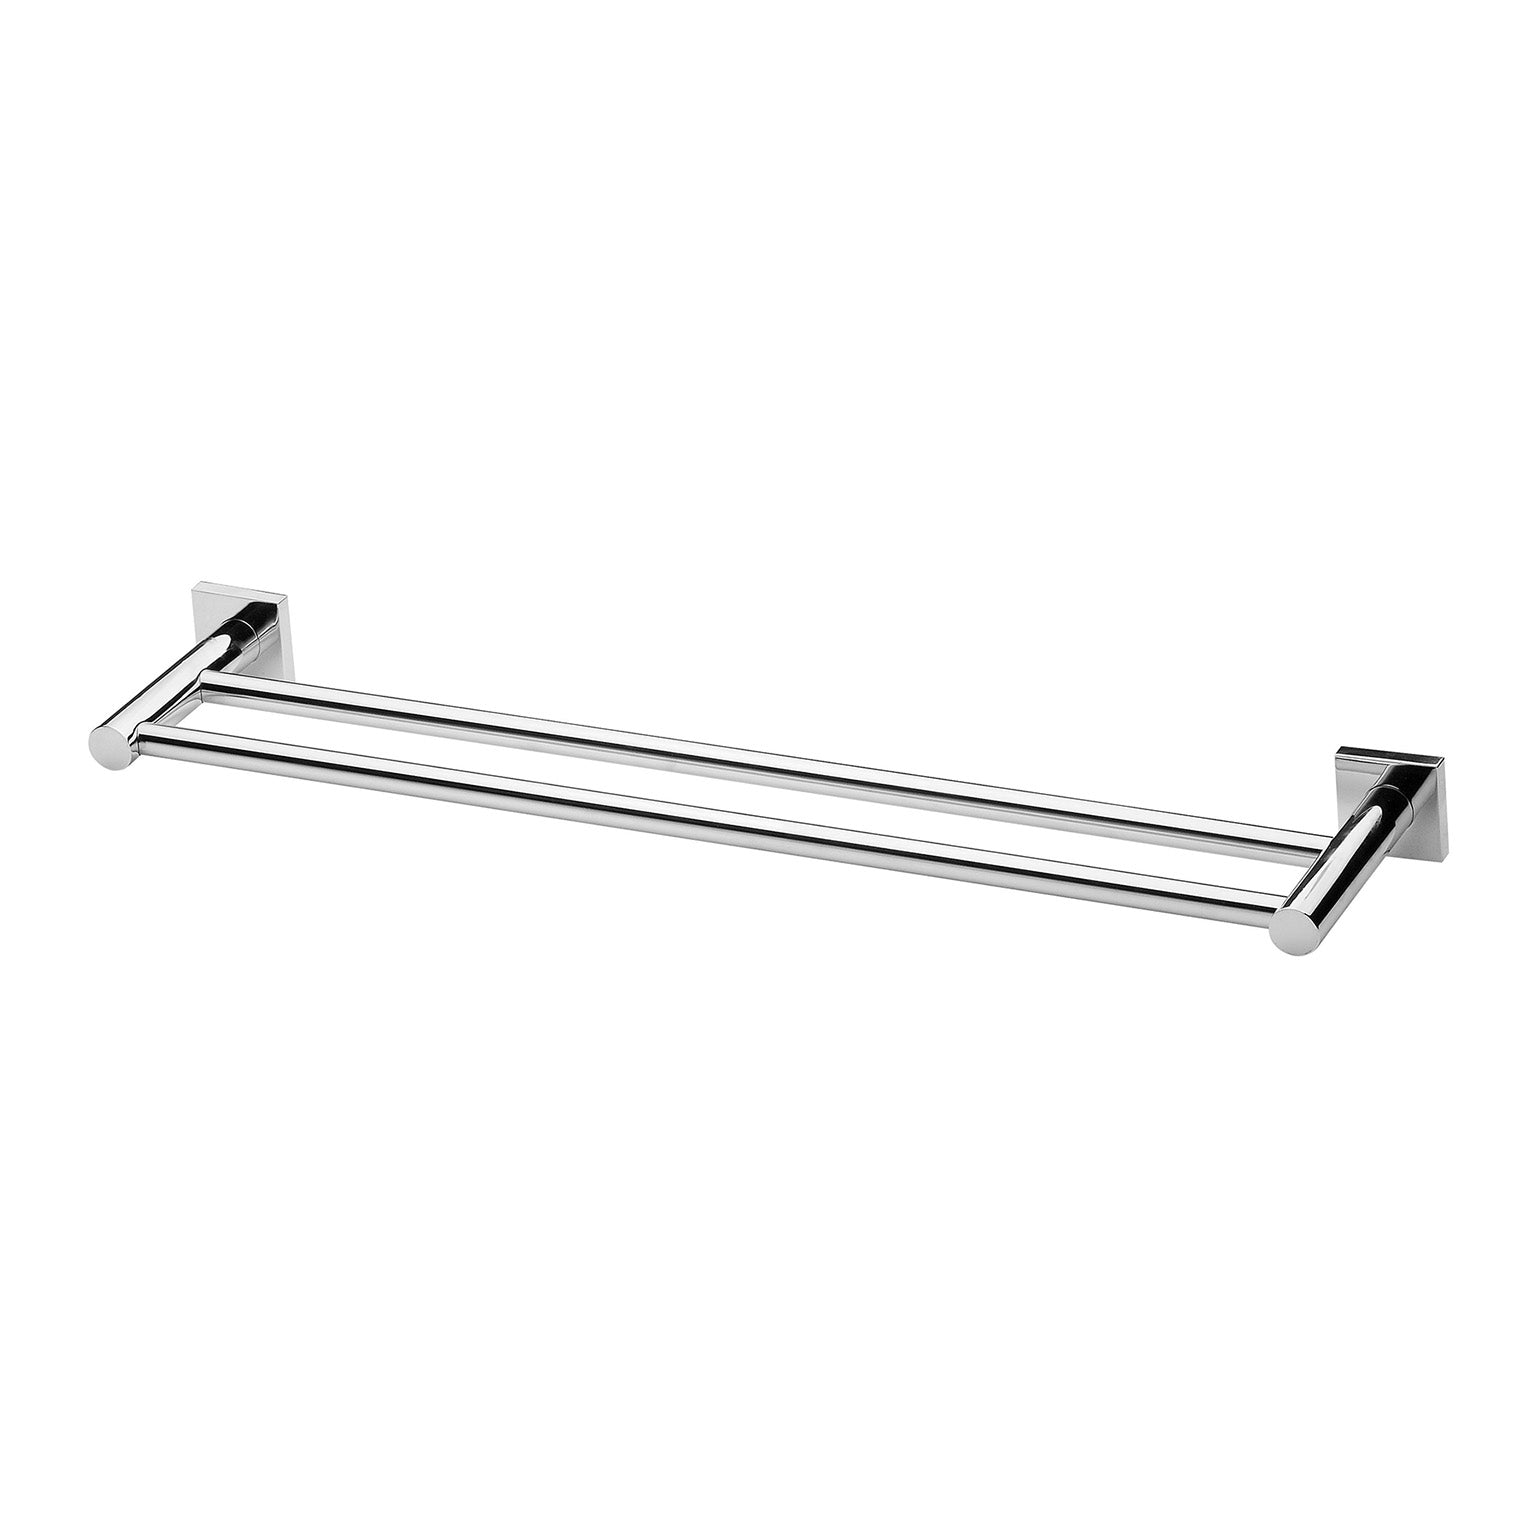 PHOENIX RADII DOUBLE NON-HEATED TOWEL RAIL SQUARE PLATE CHROME 600MM AND 800MM